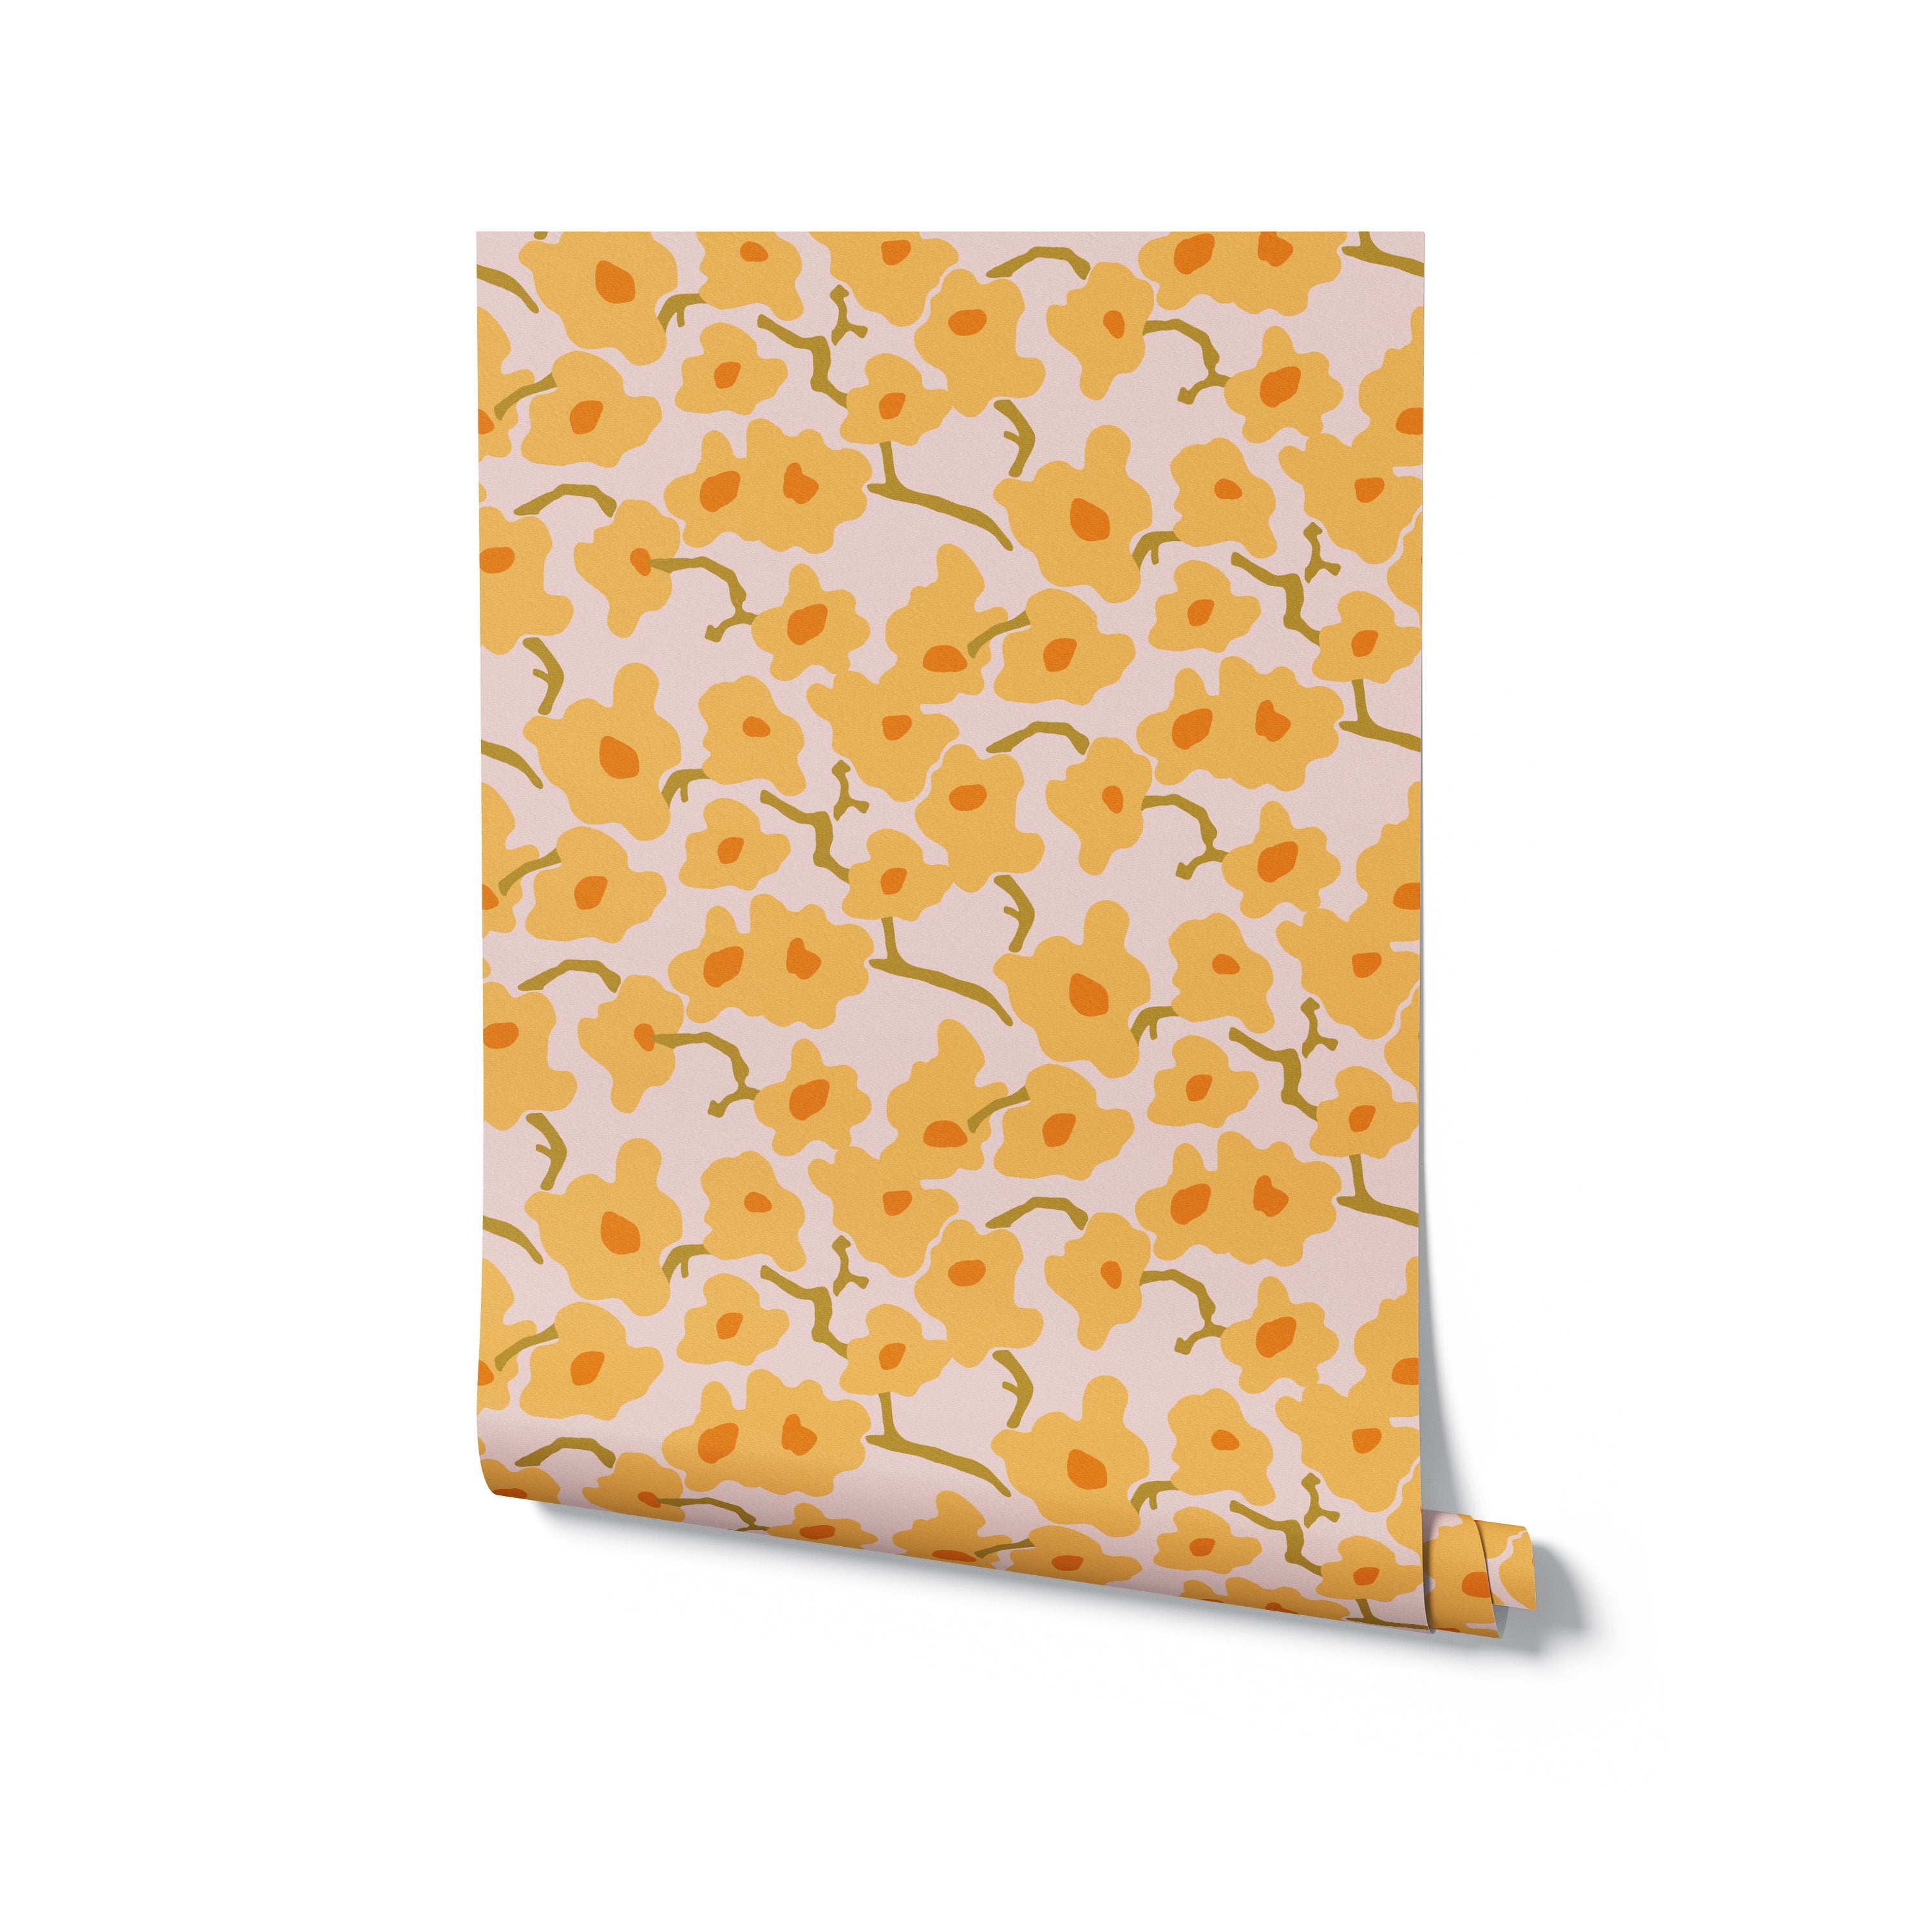 Rolled view of Abstract Meadow Wallpaper, illustrating the whimsical floral pattern with yellow blooms on a pink backdrop. The roll is slightly uncurled, showing the repeat pattern ready to transform any room with its charming and sunny disposition.